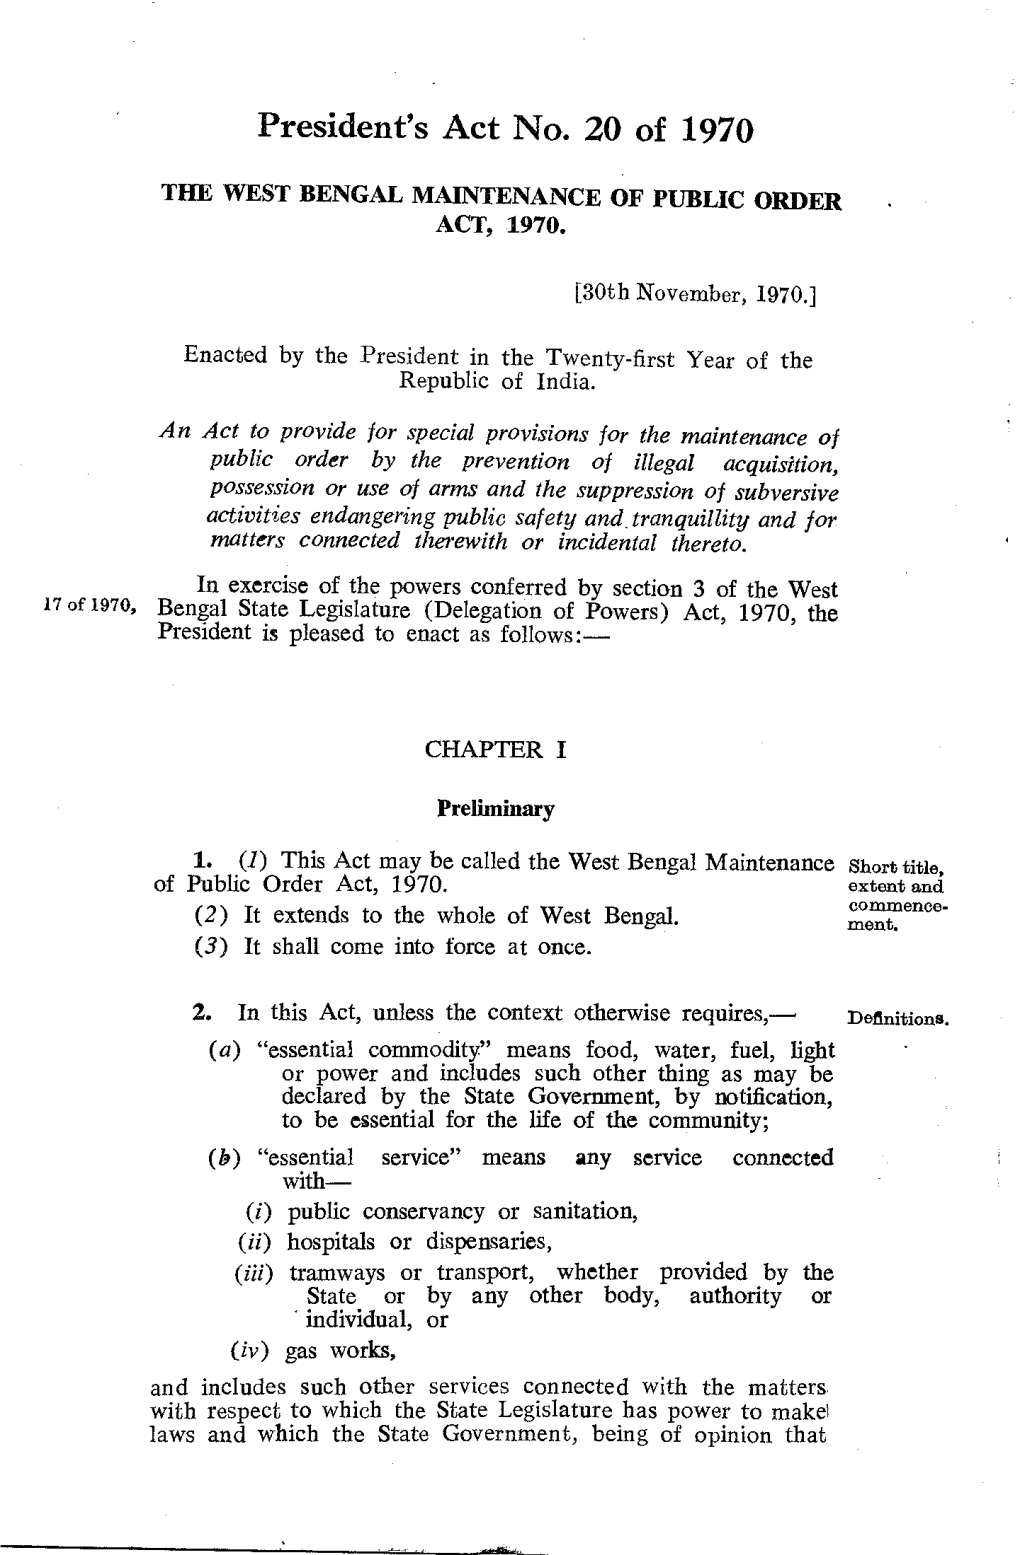 President's Act No. 20 of 1970